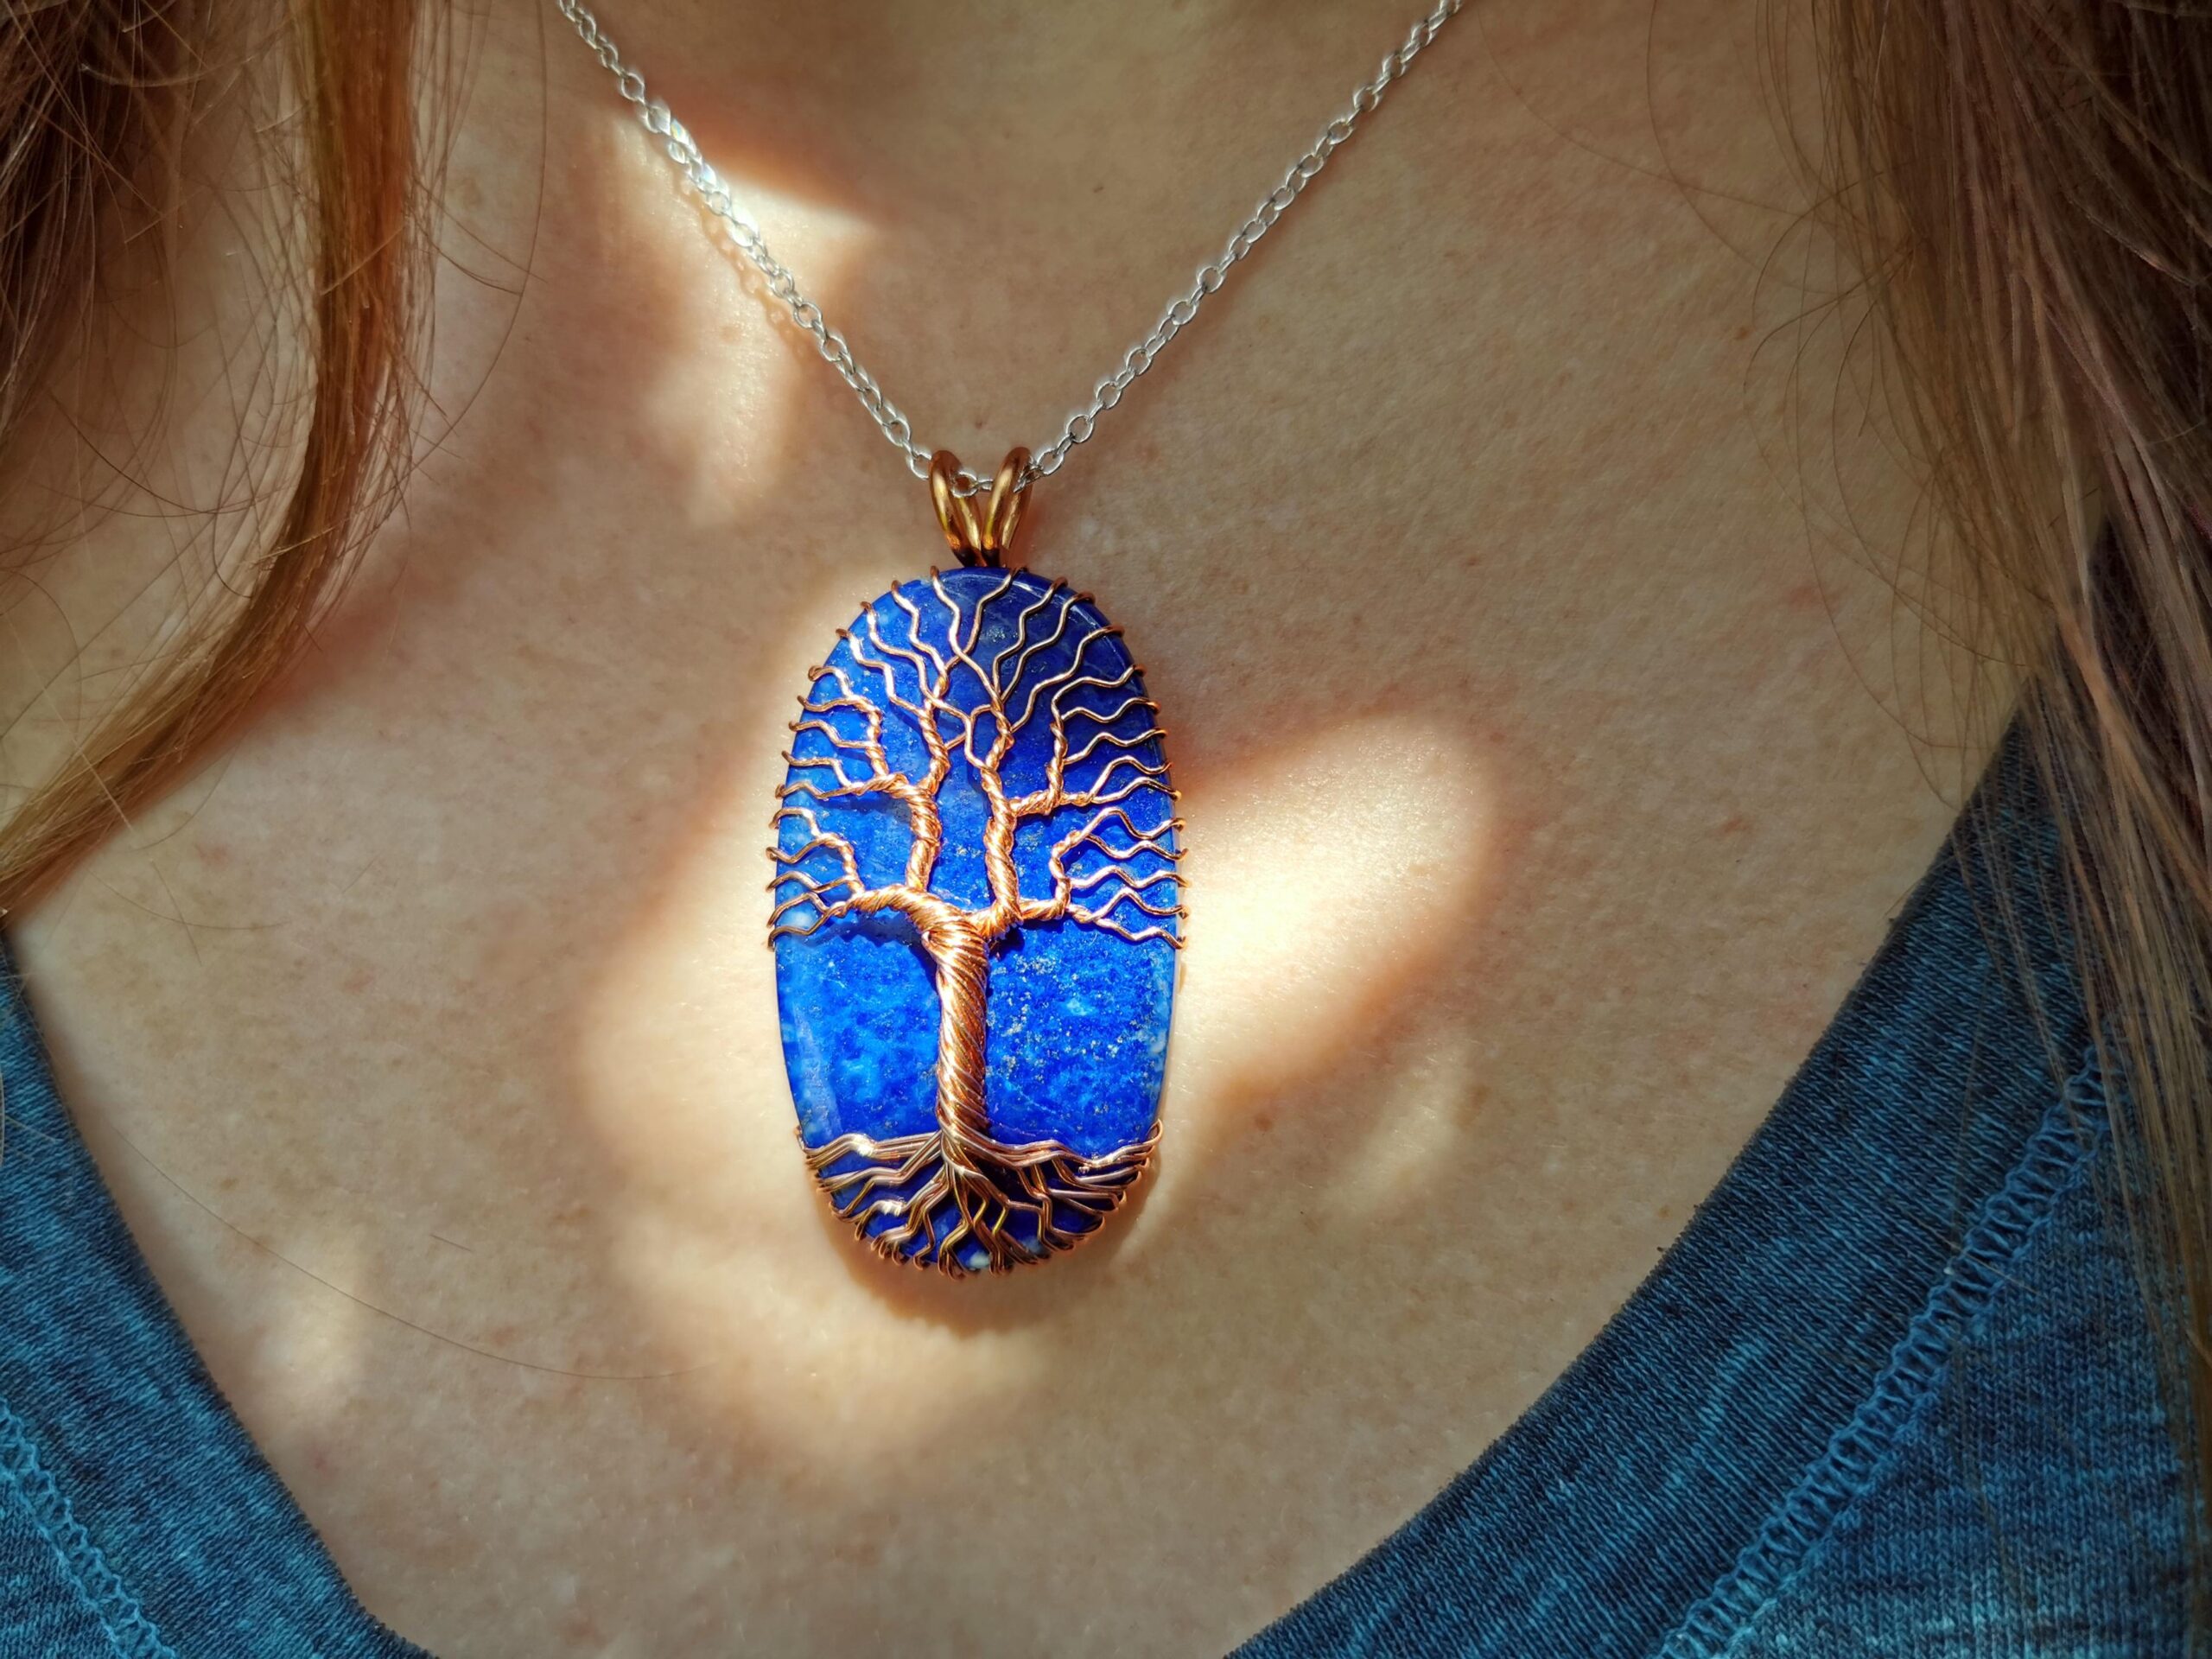 Here’s a lapis lazuli tree pendant I made. I frail about 5 meters of covered copper wire.